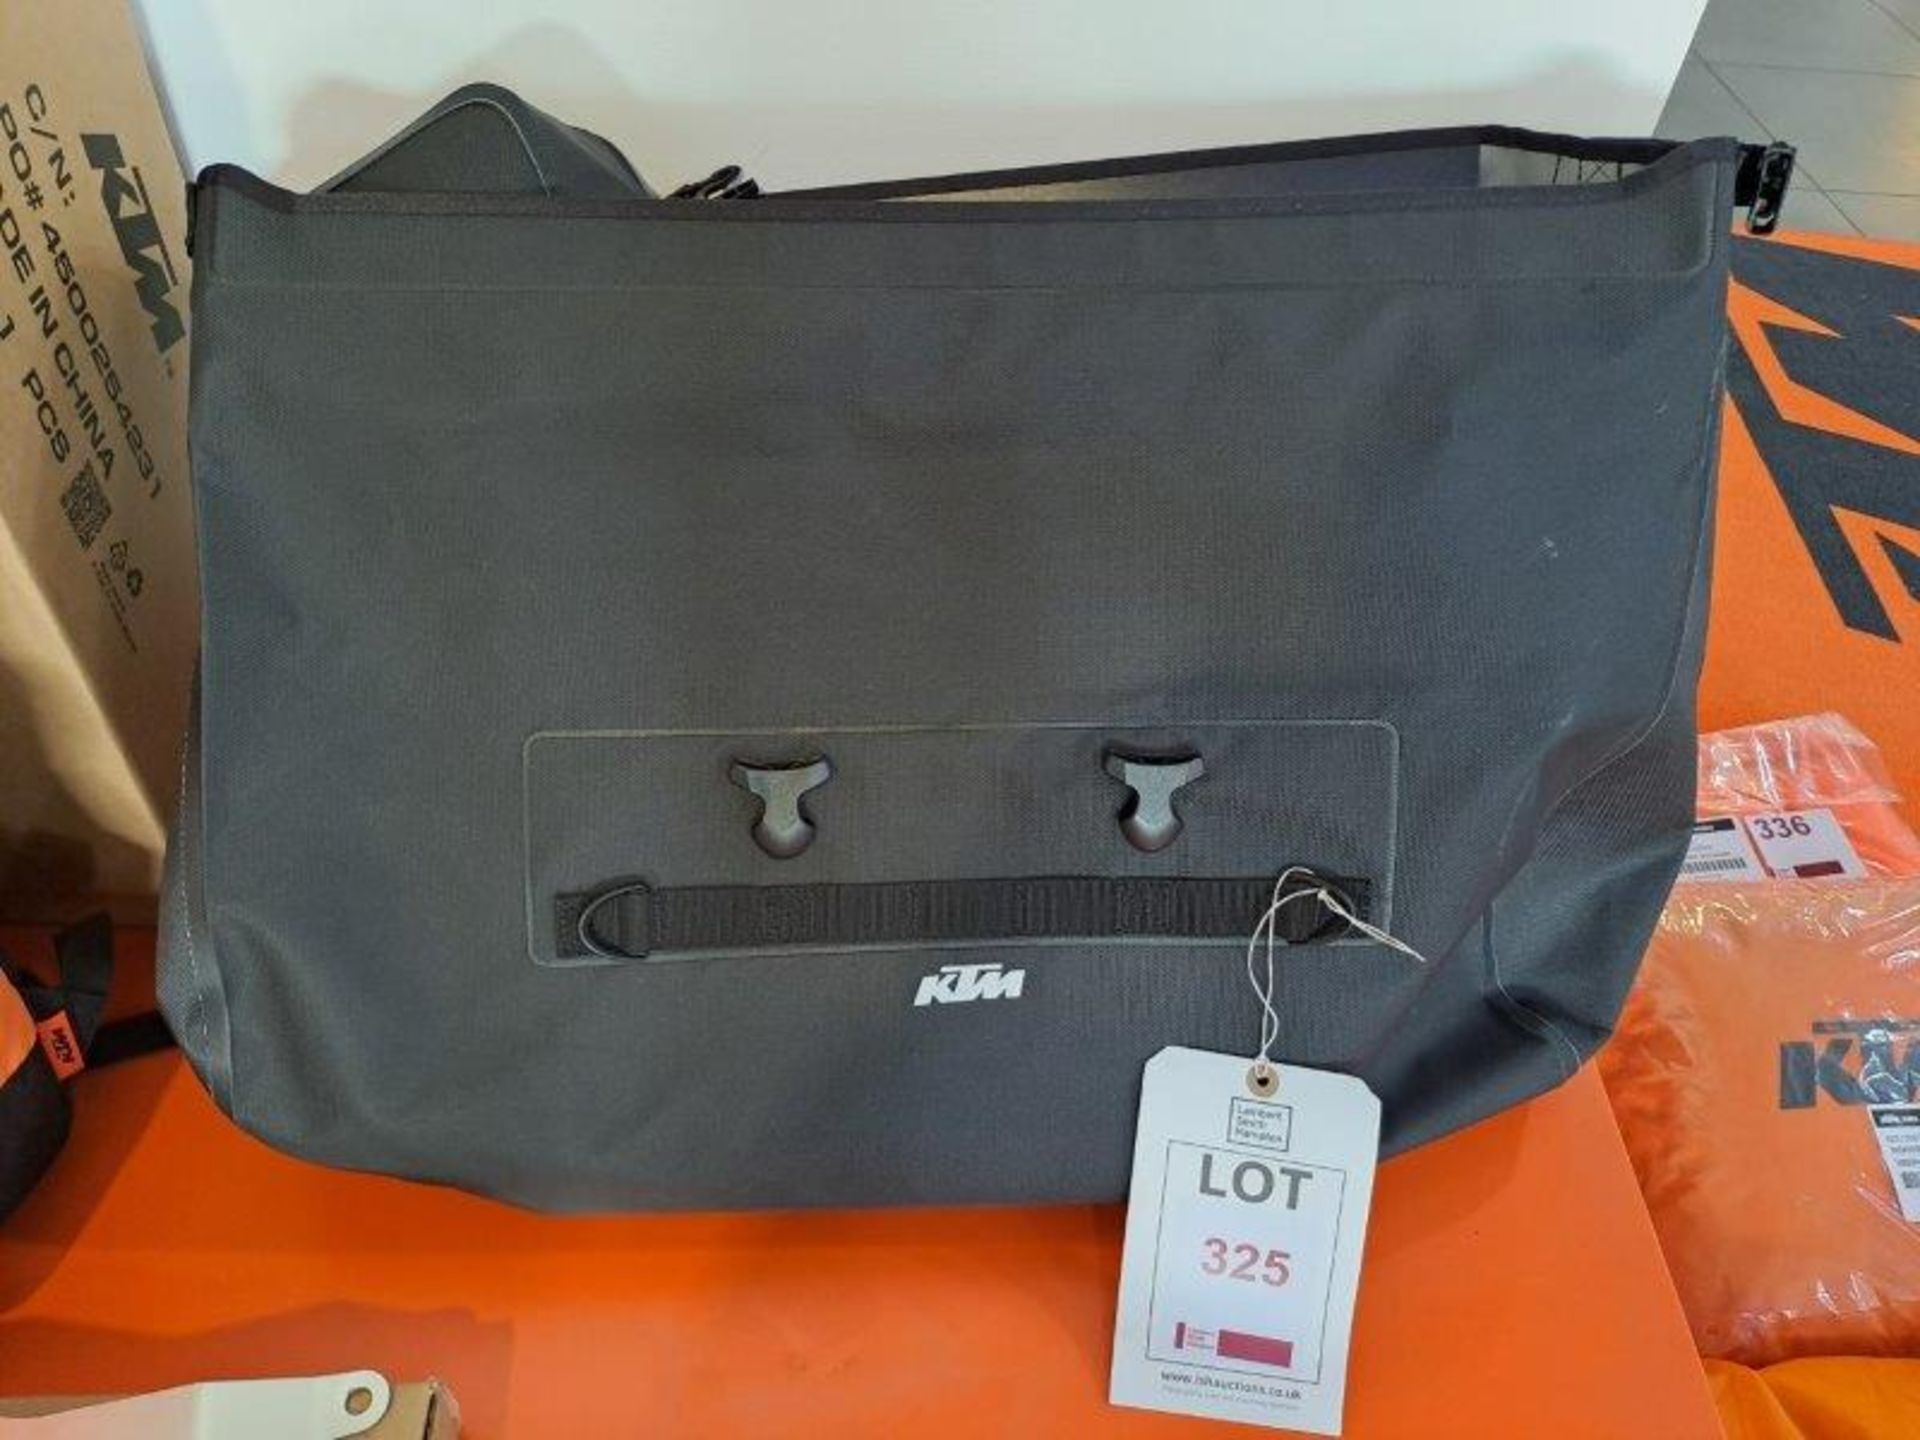 3 x Various KTM Bags as pictured